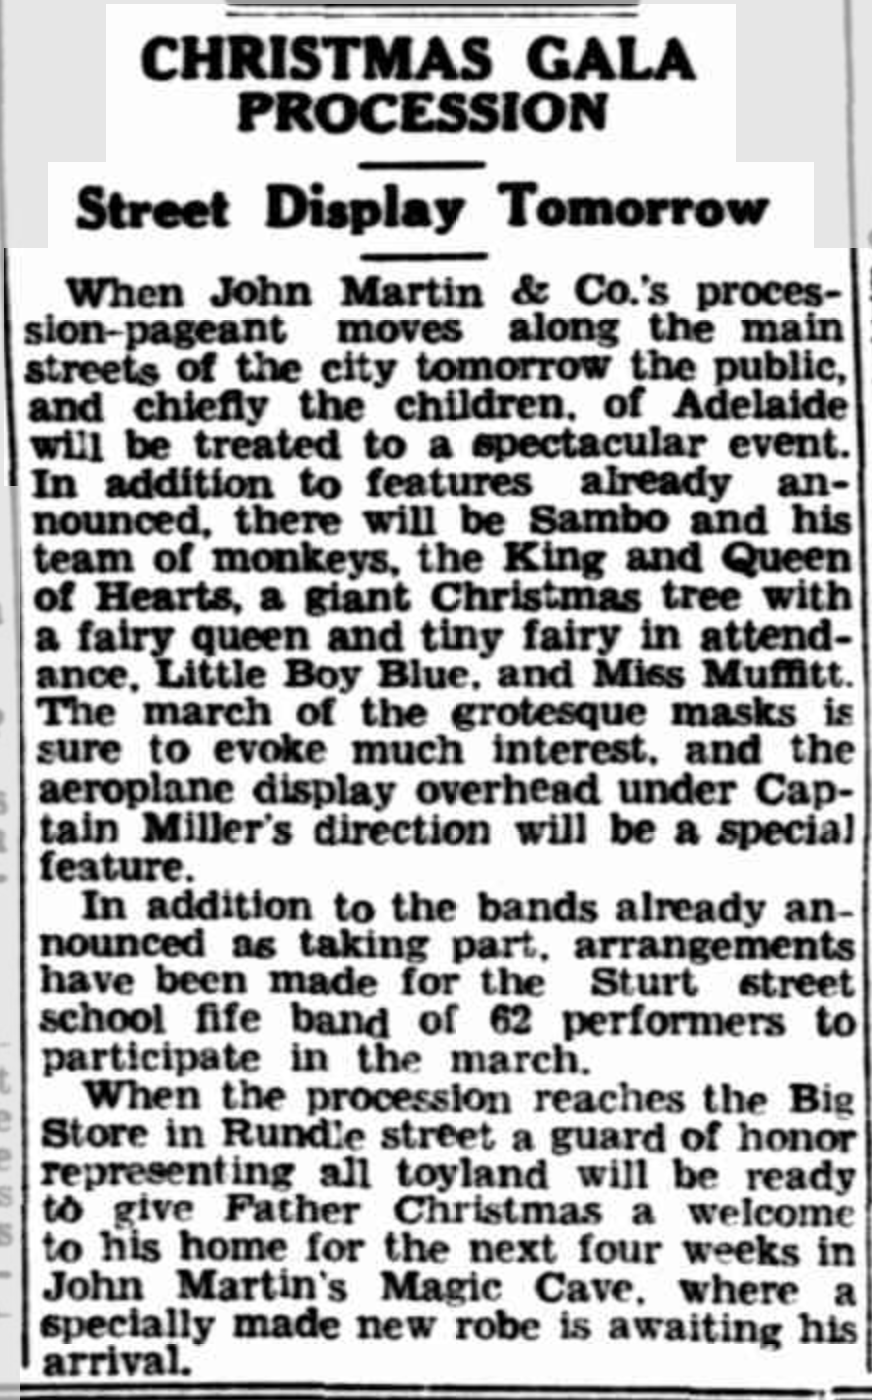 933 'CHRISTMAS GALA PROCESSION', The Advertiser. Newspaper clipping.